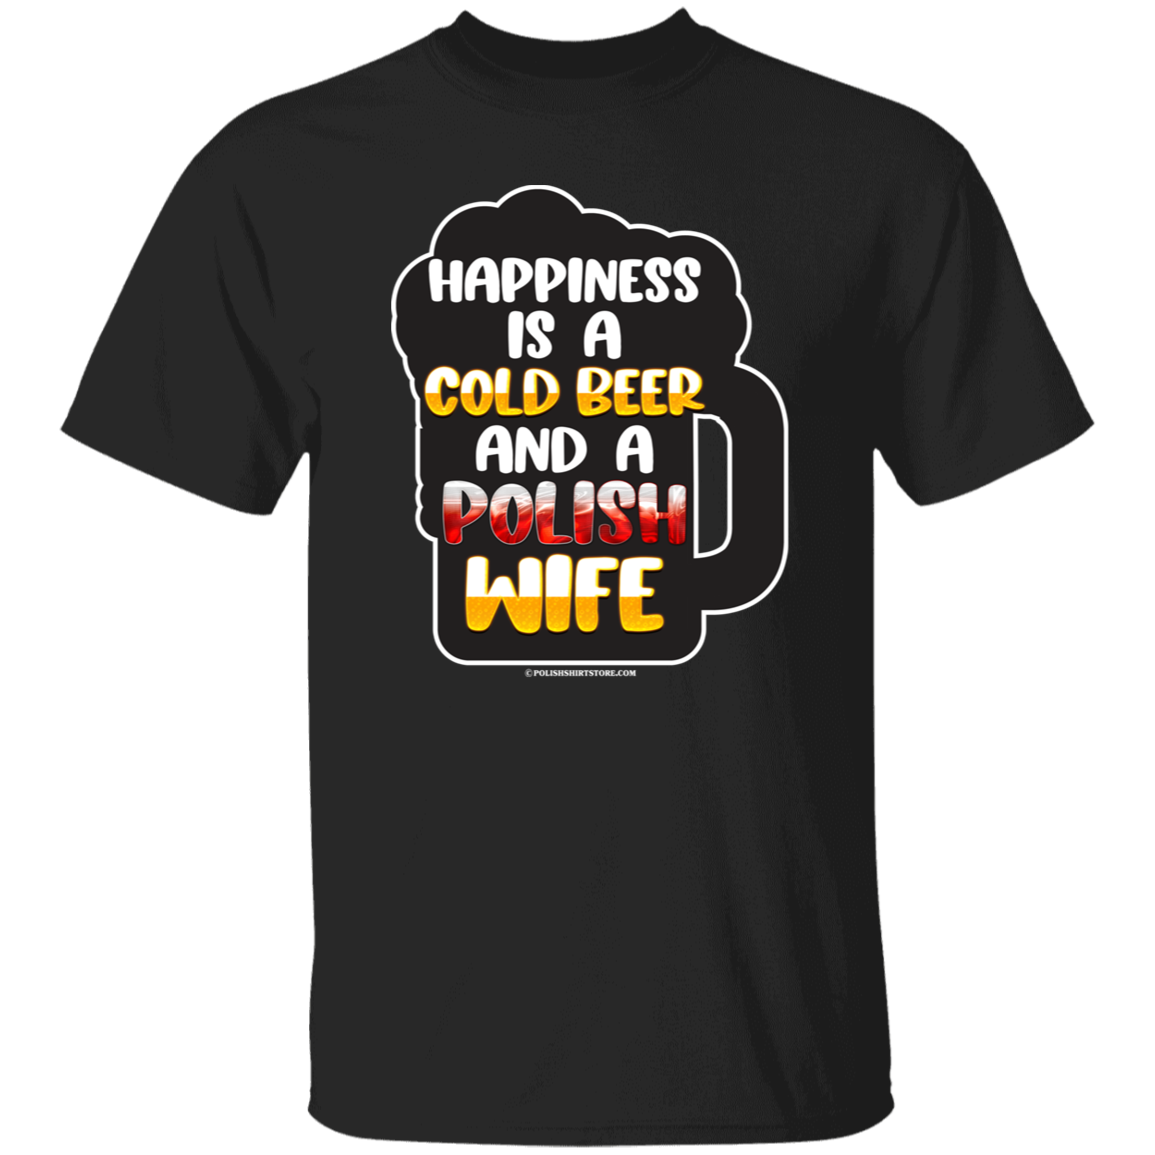 Happiness Is A Cold Beer And A Polish Wife Apparel CustomCat G500 5.3 oz. T-Shirt Black S